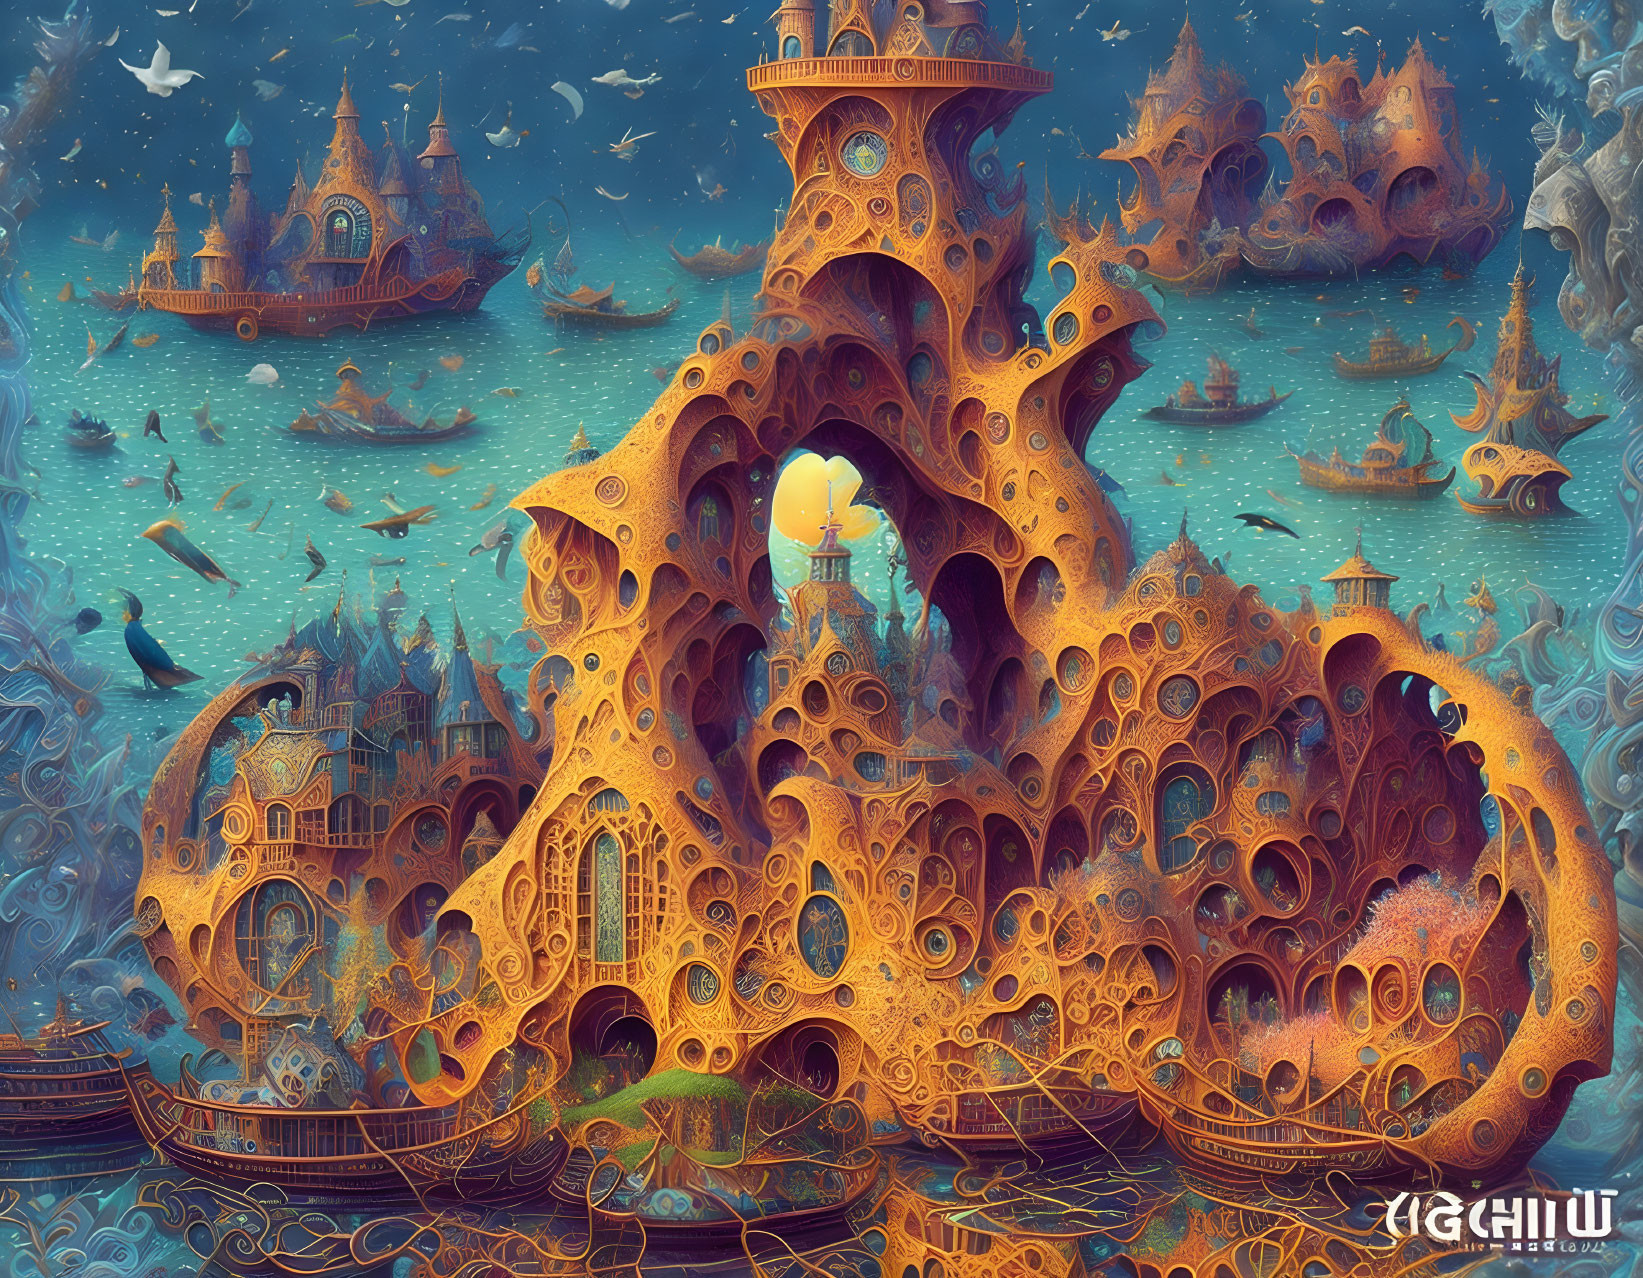 Intricate orange and blue surreal castle with marine life under starry sky